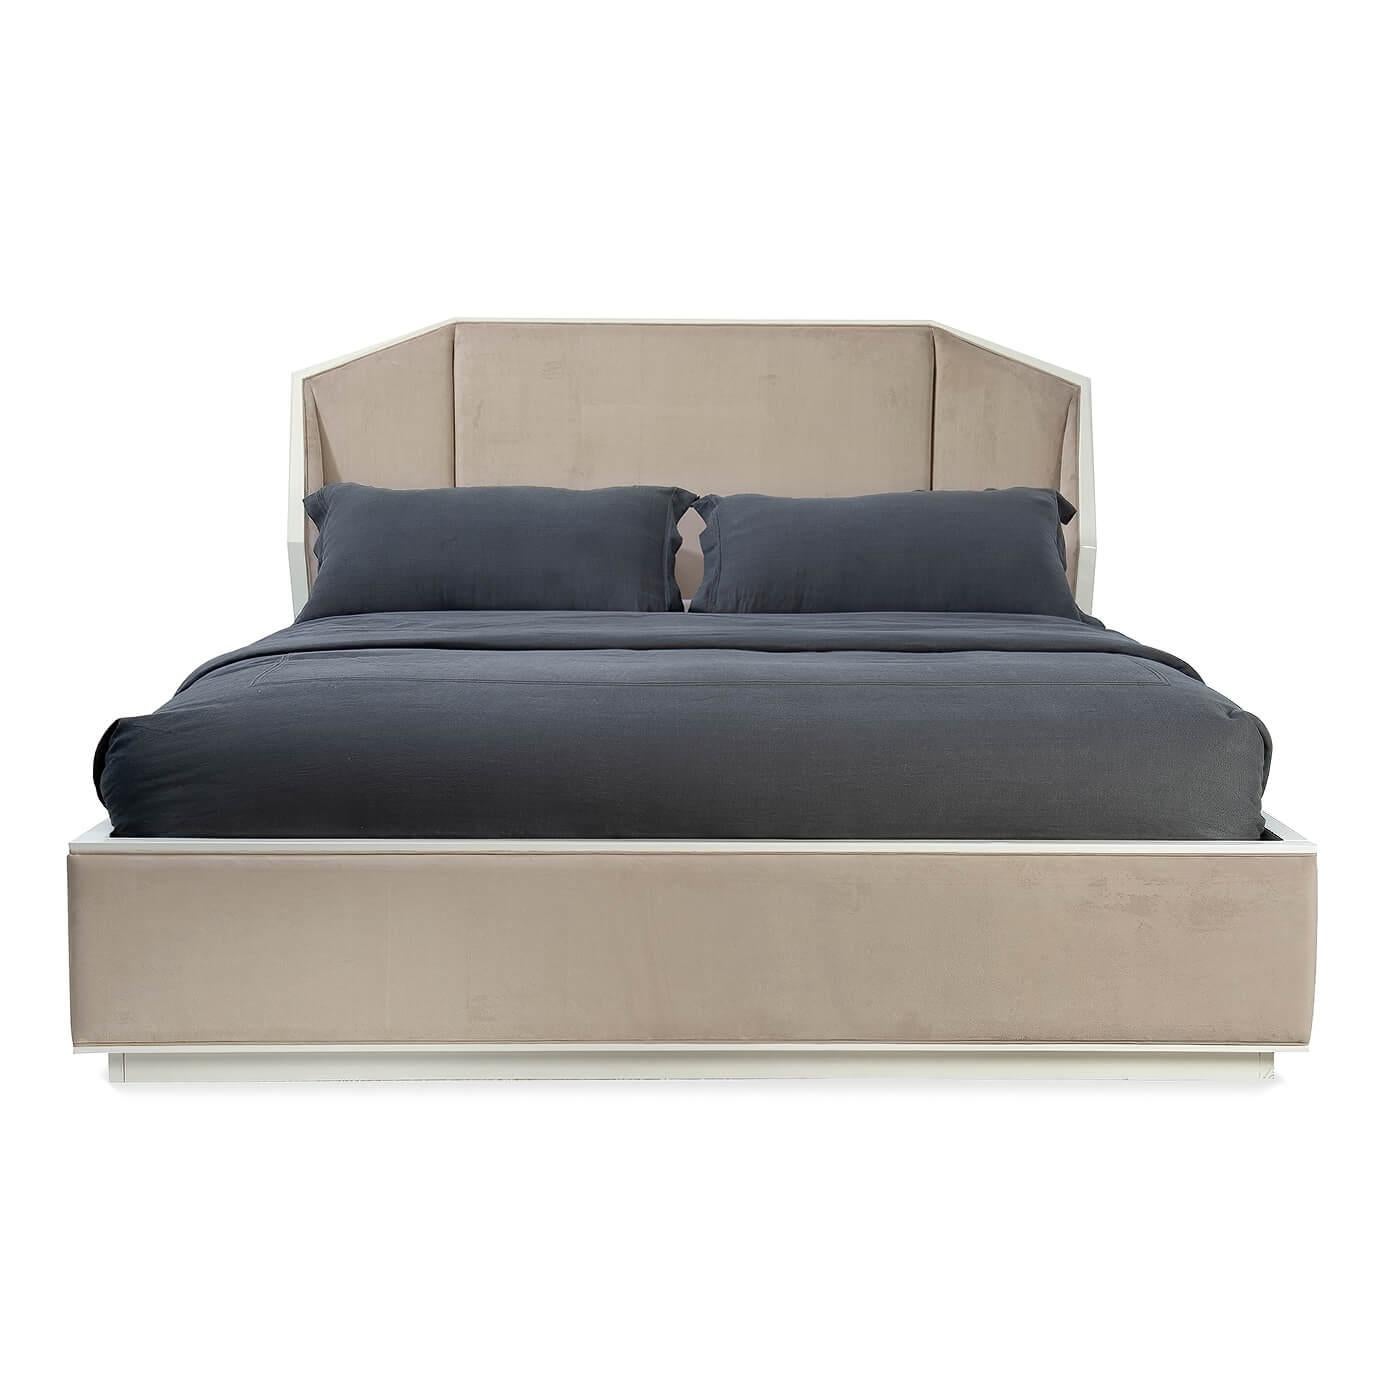 An Art Deco-inspired upholstered king bed with an upholstered canted corner headboard having envelope sides. The Art Deco geometric-inspired design gives a nod to the Architecture of the 1930s. 

Tailored with great care, it offers comfort and